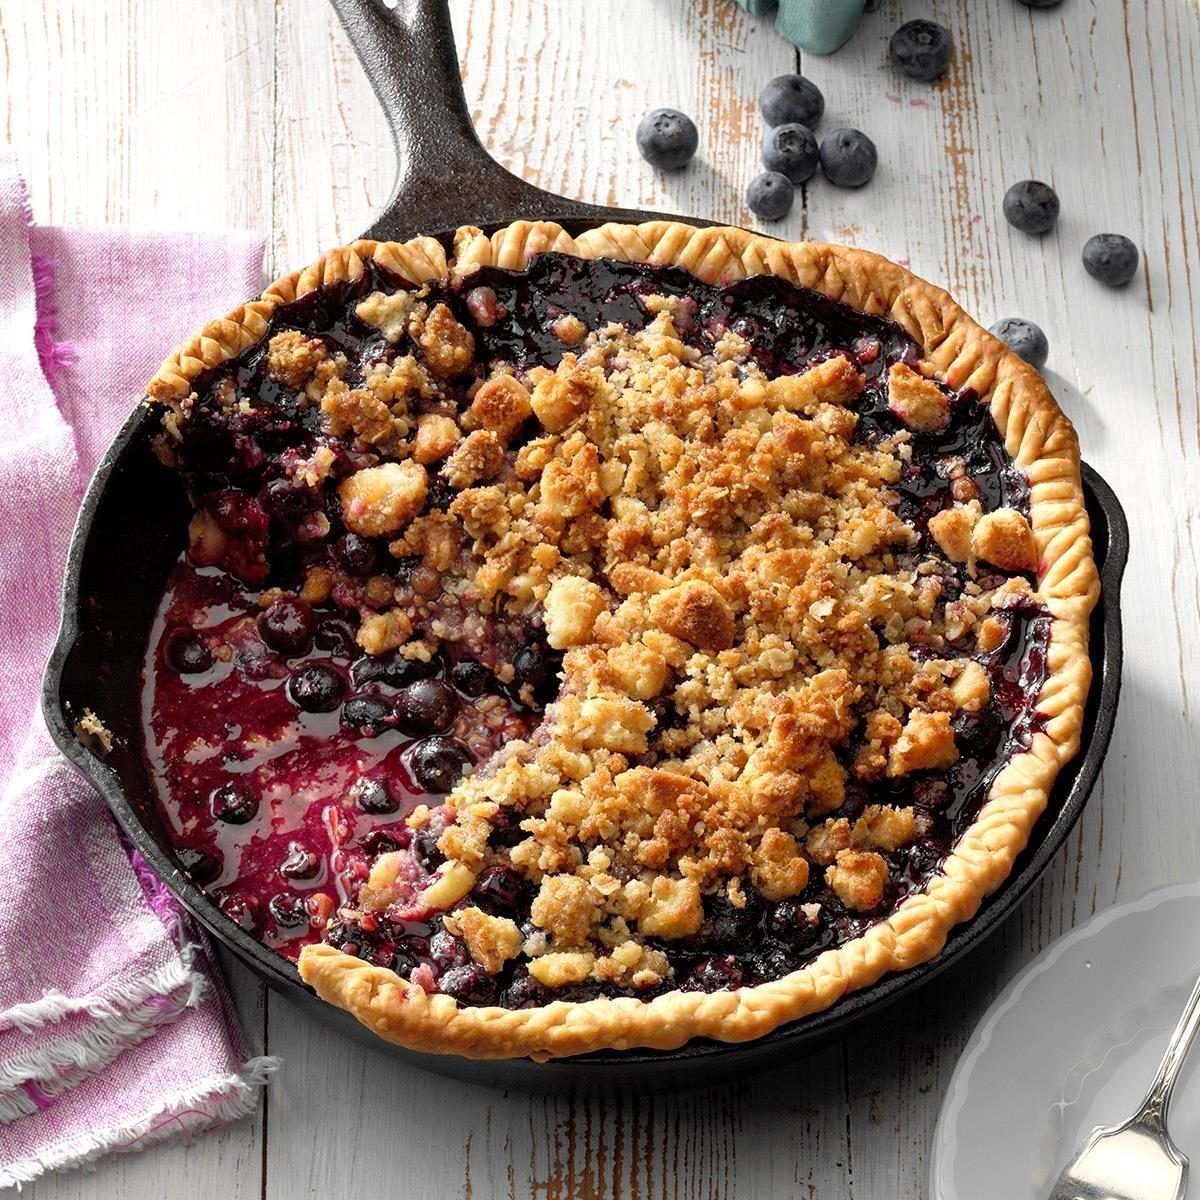 Maine Blueberry Pie With Crumb Topping Recipe How To Make It Taste Of Home 